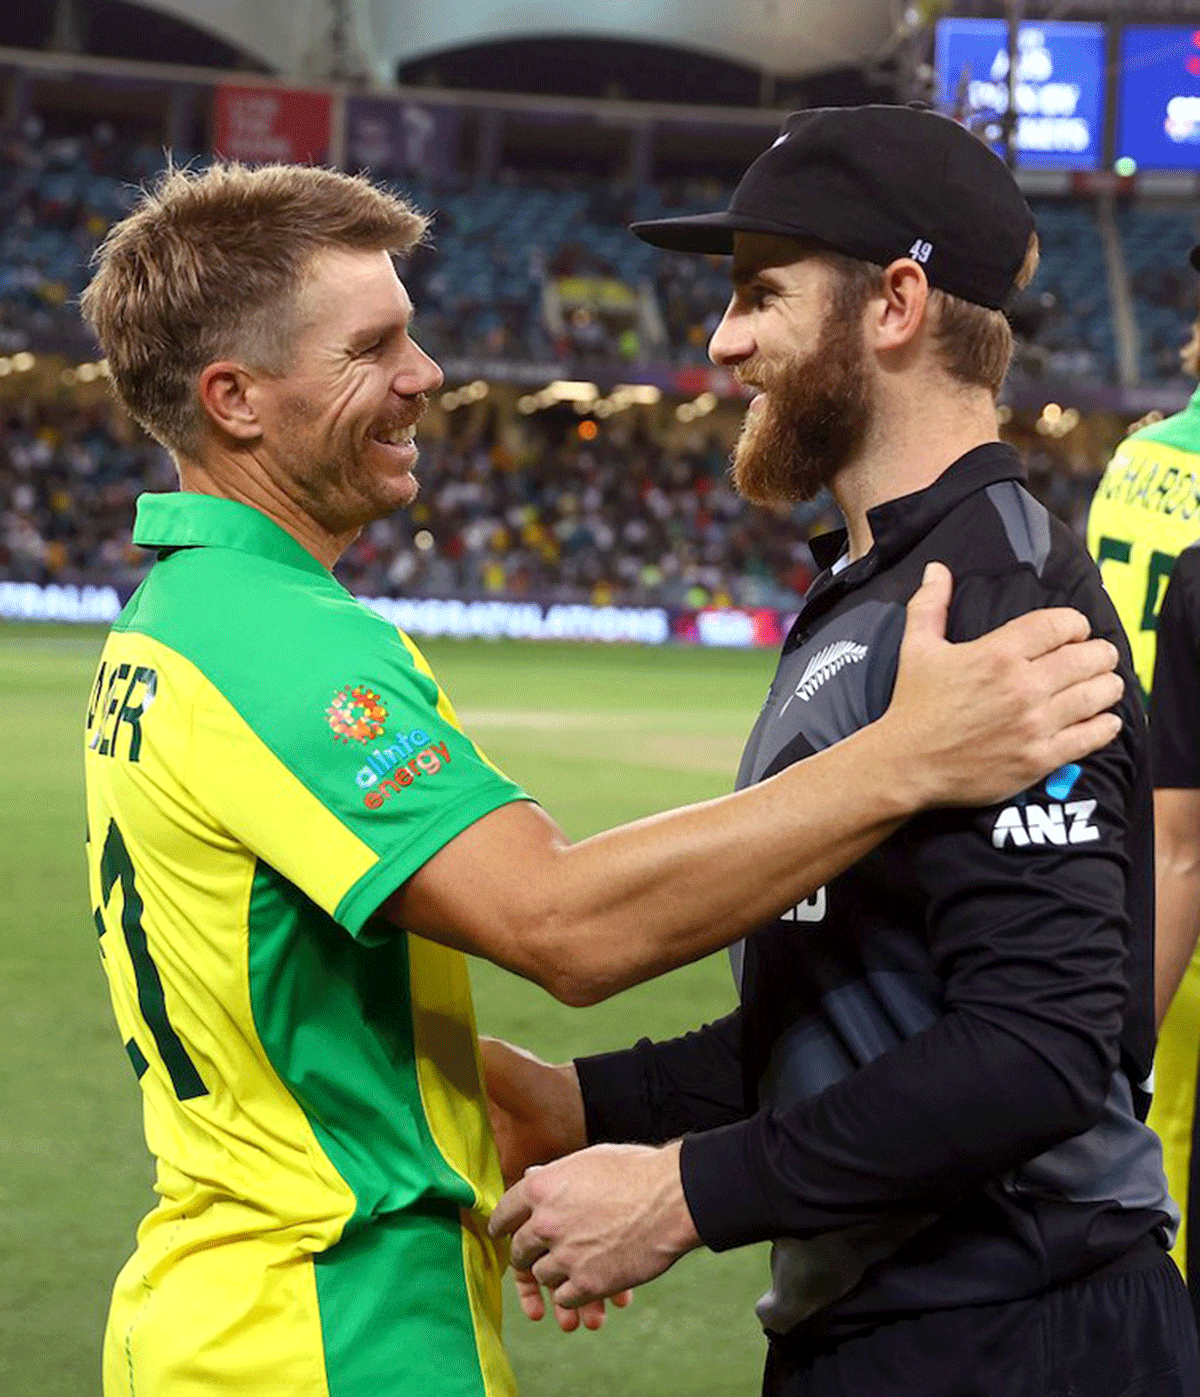 Australia's David Warner and New Zealand's Kane Williamson greet each other after the final on Sunday